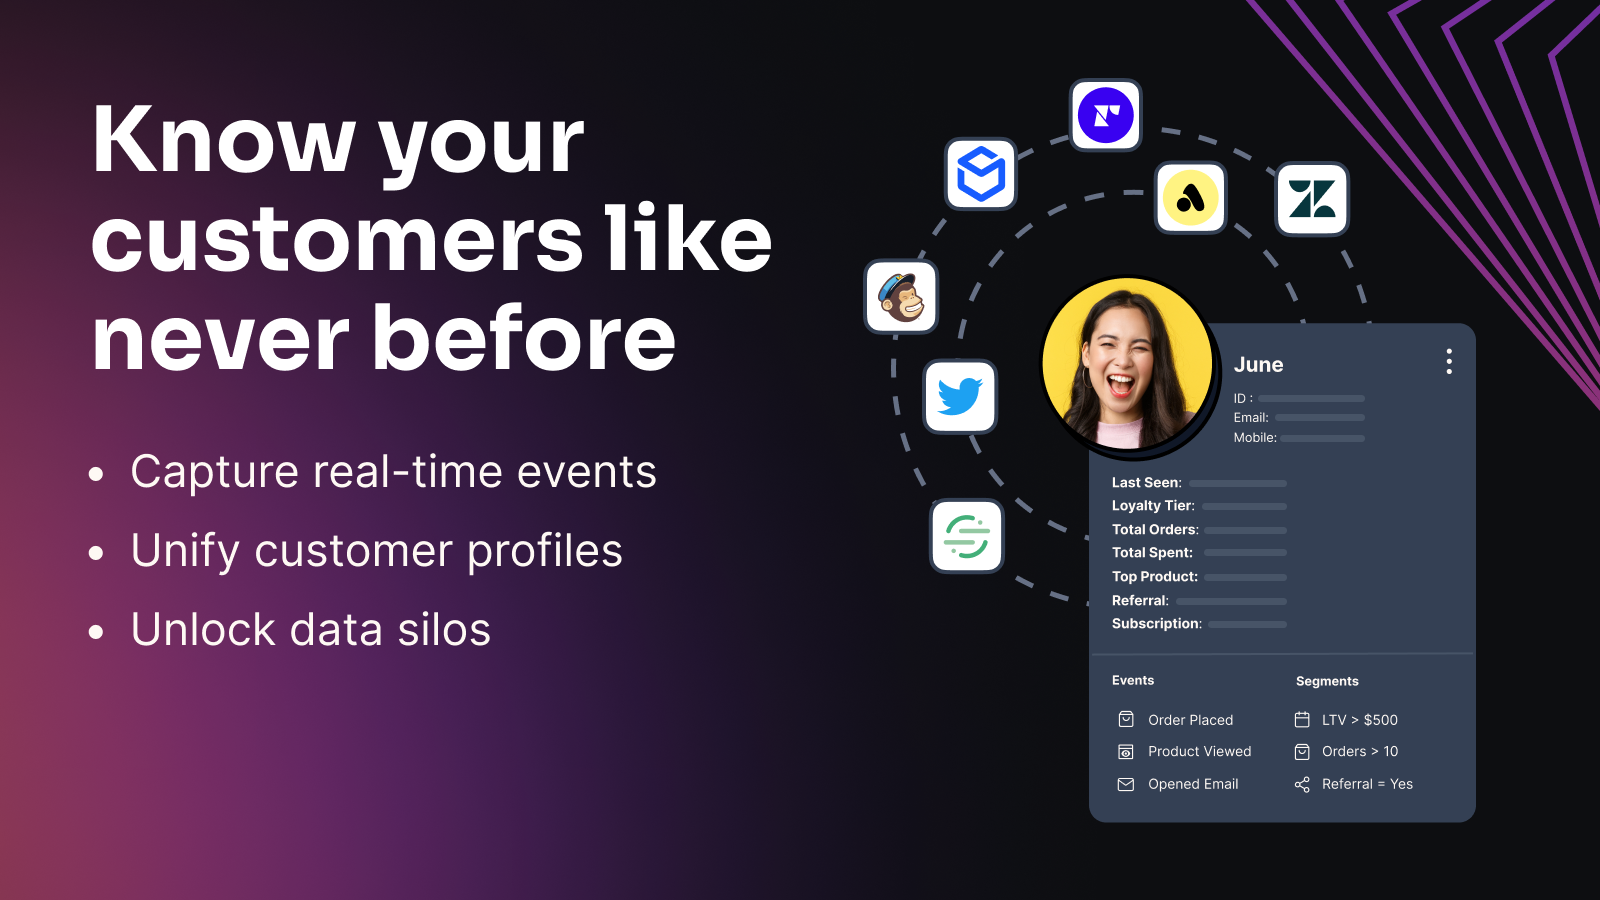 Understand your customers like never before